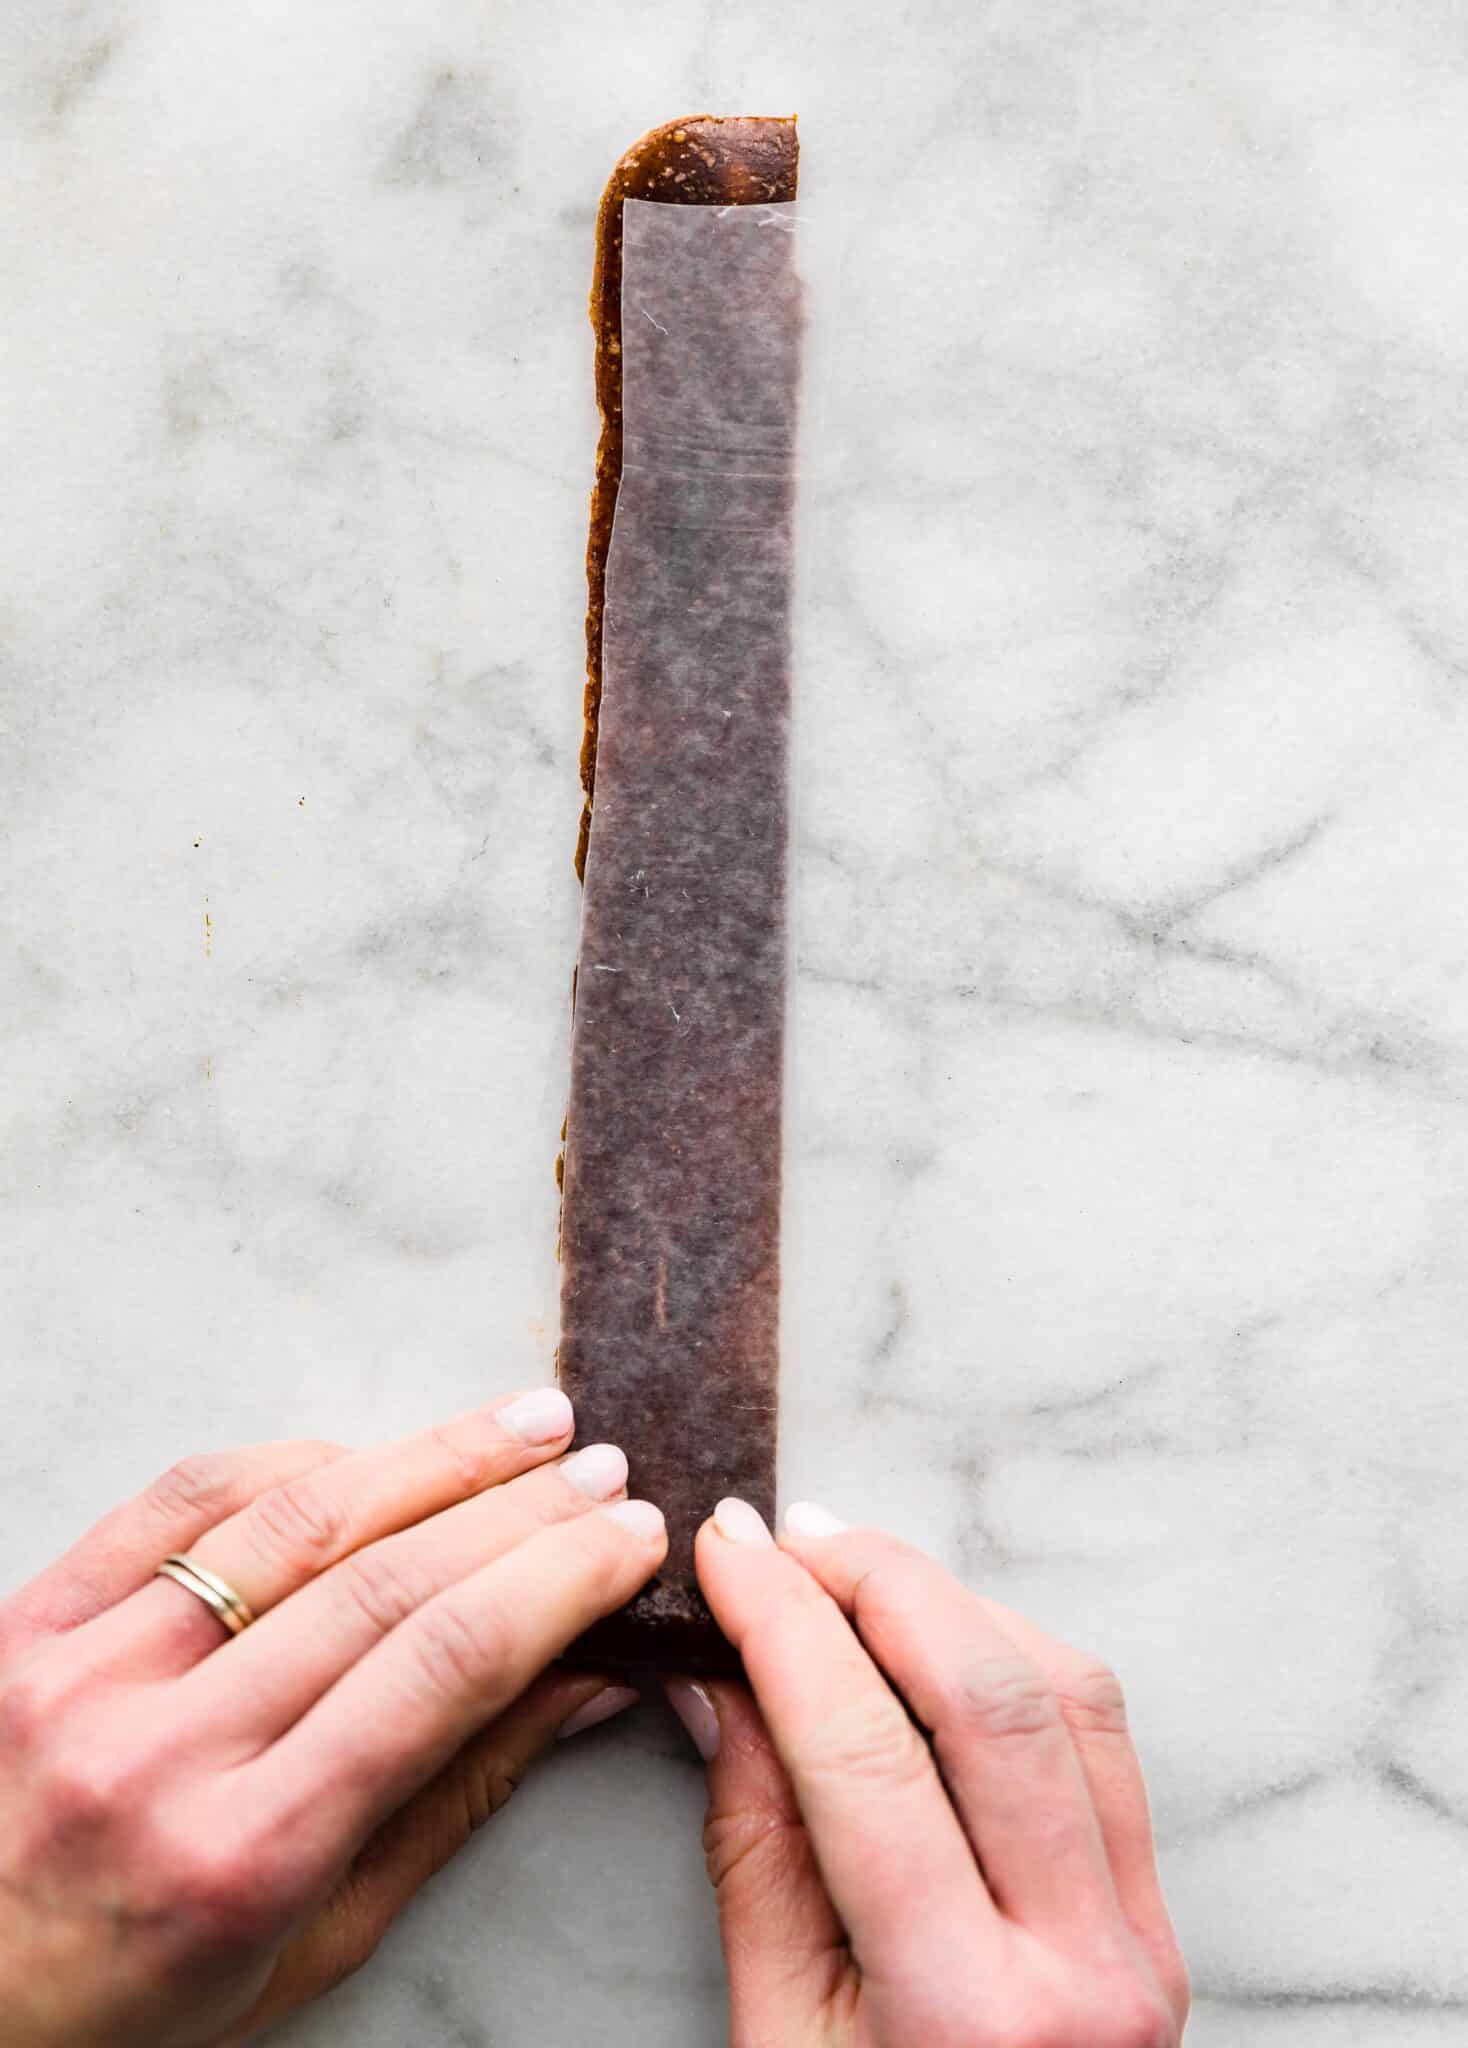 A woman's hands rolling up a homemade fruit roll up on strips of parchment paper.